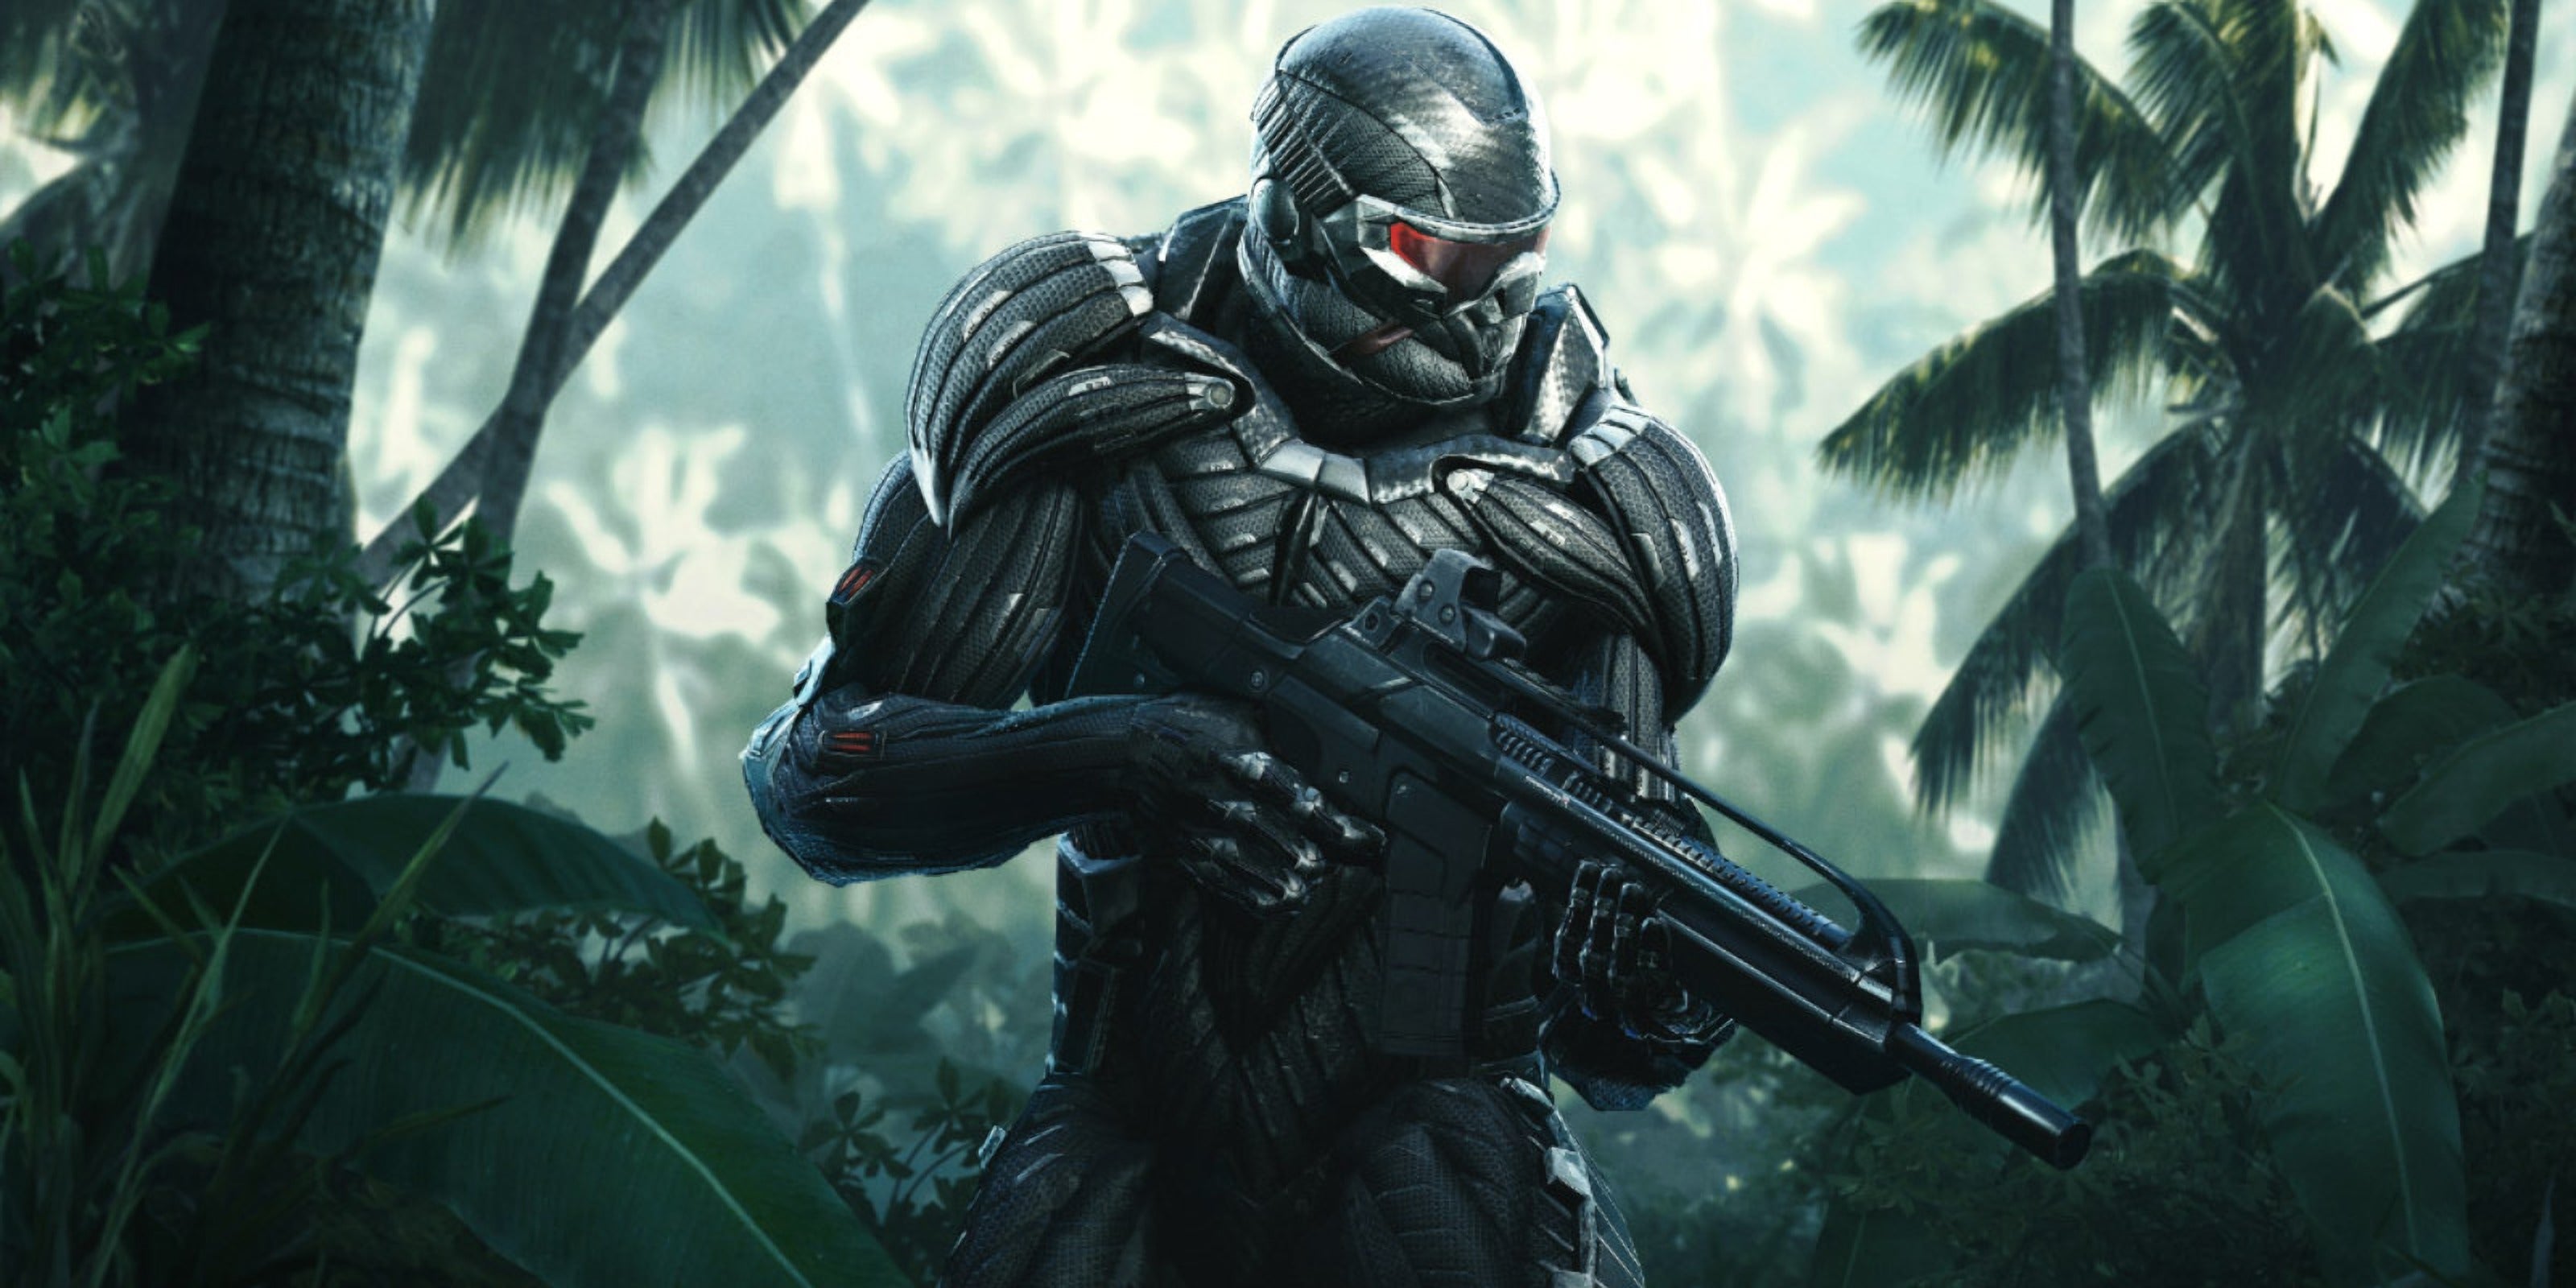 Image for Crysis Remastered Switch: Modding/Overclocking - Can We Improve Performance + Graphics?